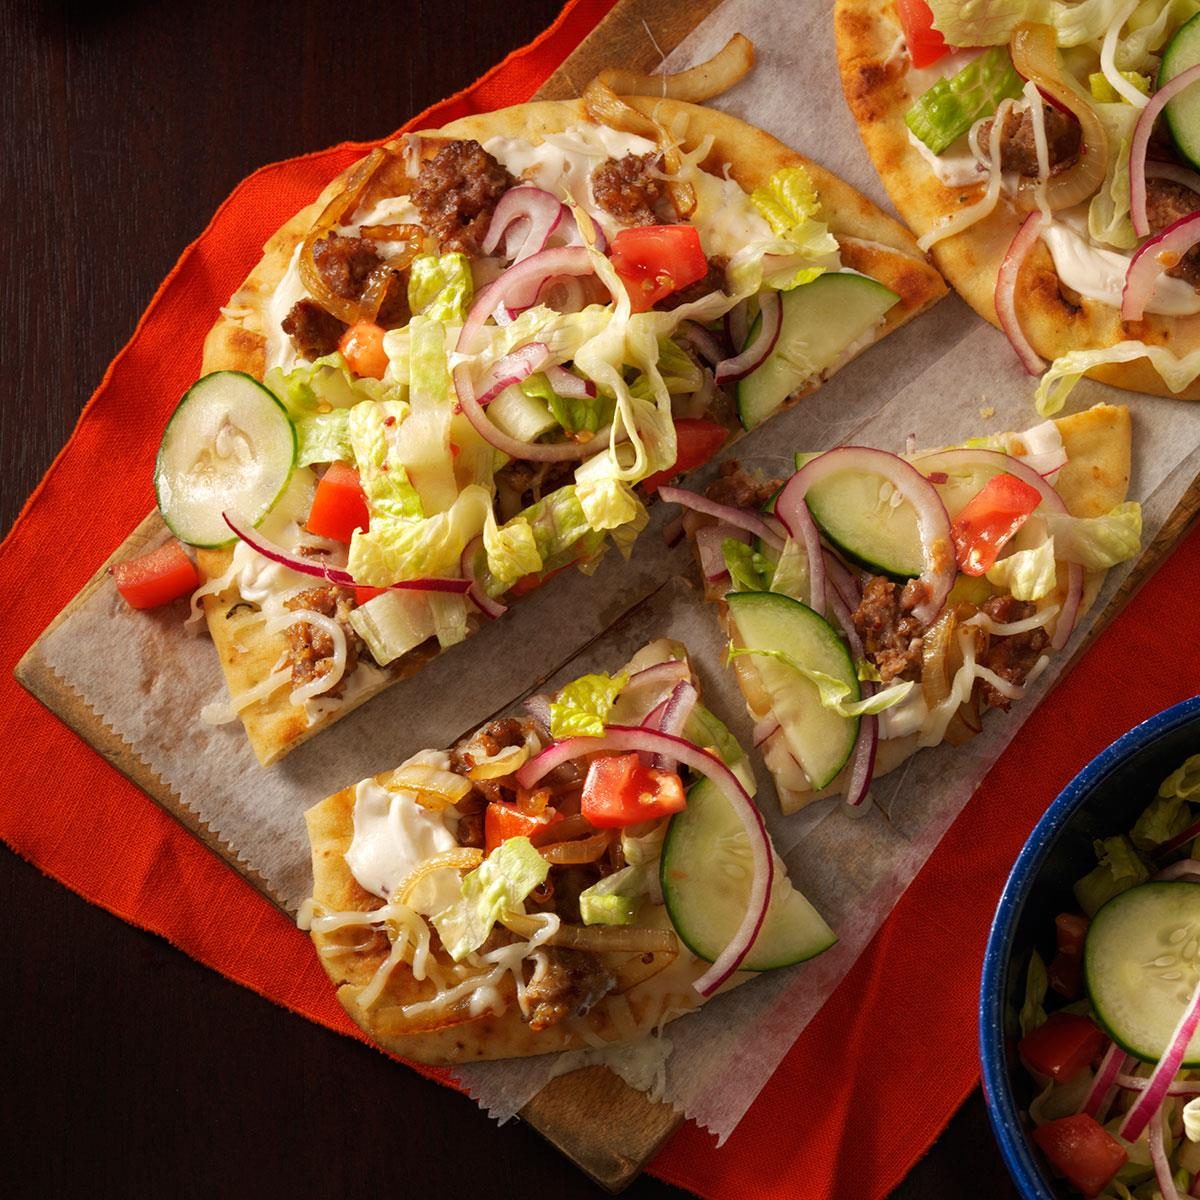 Salad Topped Flatbread Pizzas Exps127713 Th143190c09 27 4bc Rms 4